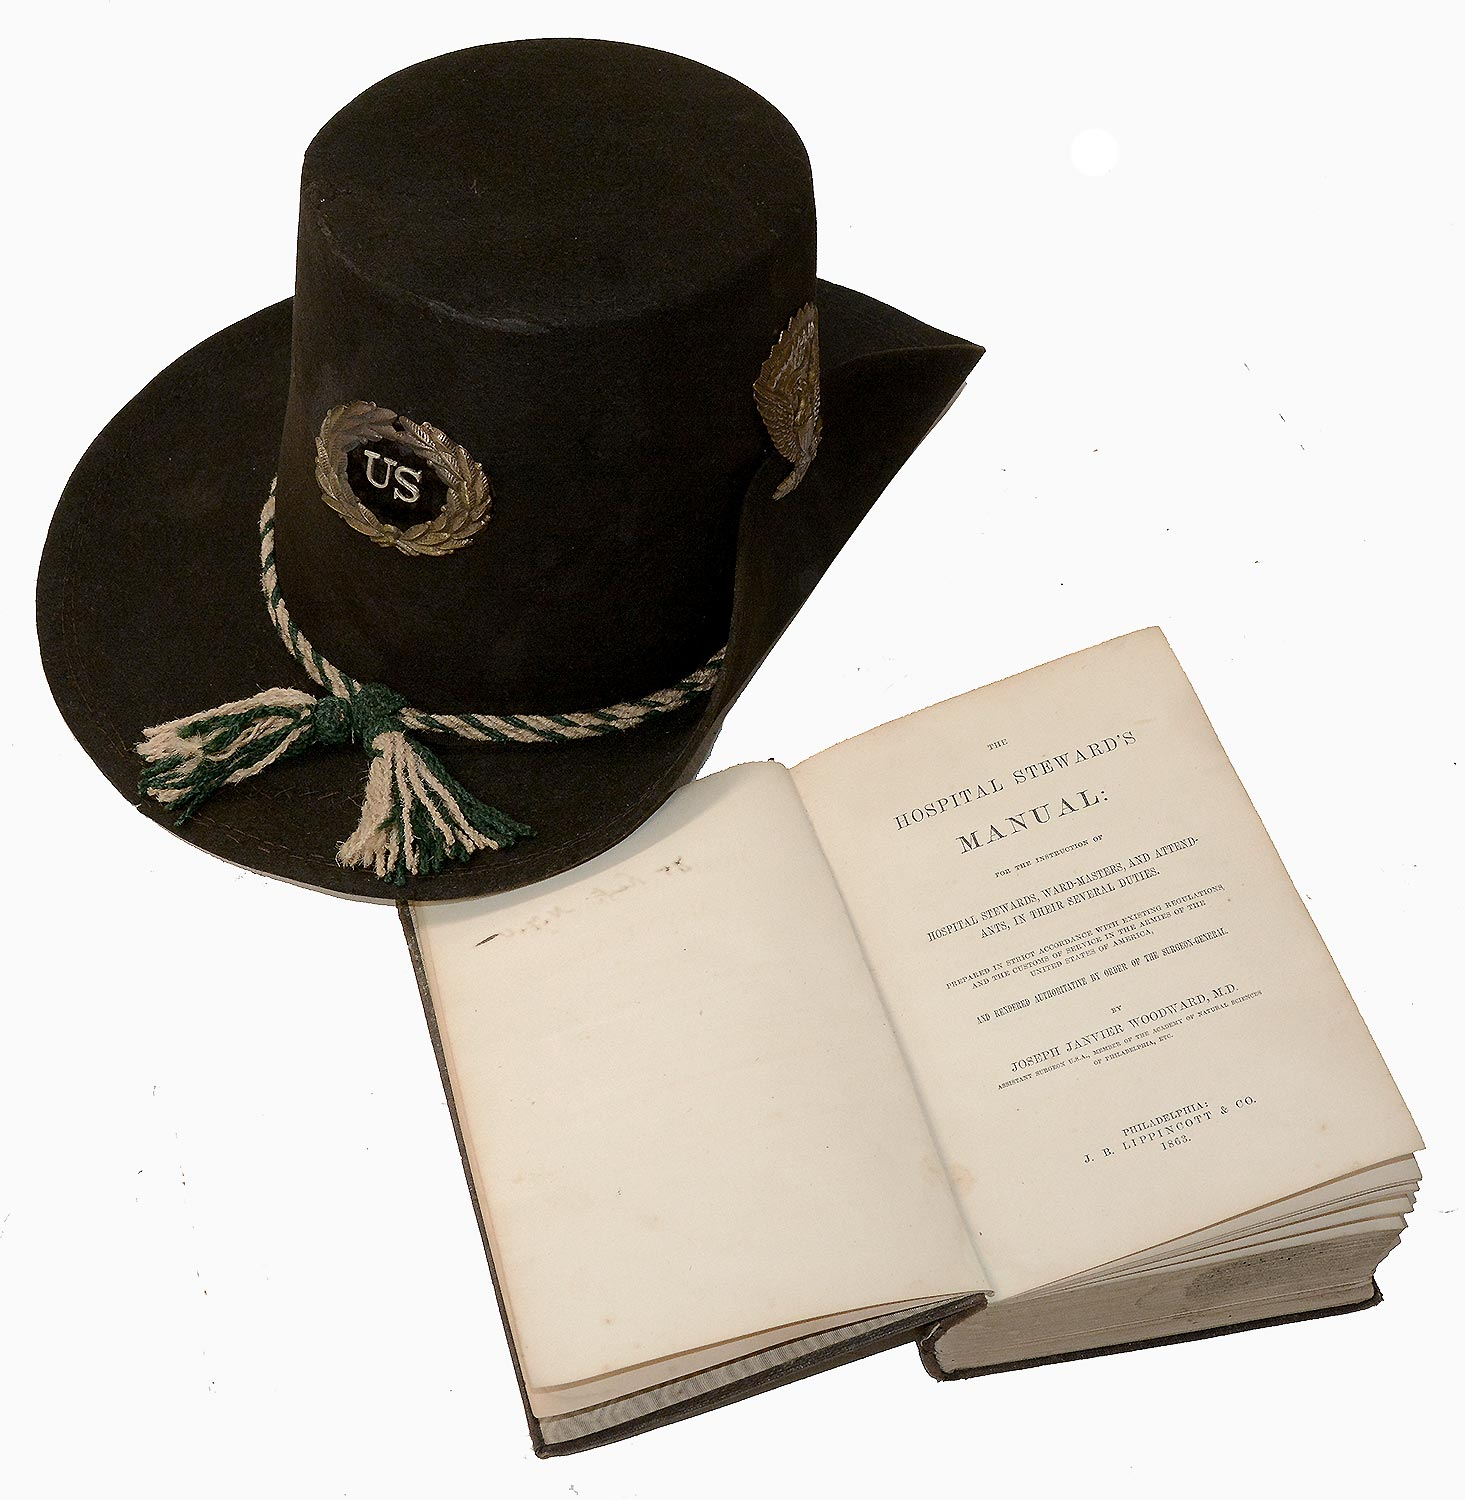 RARE HOSPITAL STEWARD’S HARDEE HAT AND MANUAL – WILLIAM HENRY COMSTCOK, 85TH NEW YORK VOLUNTEERS